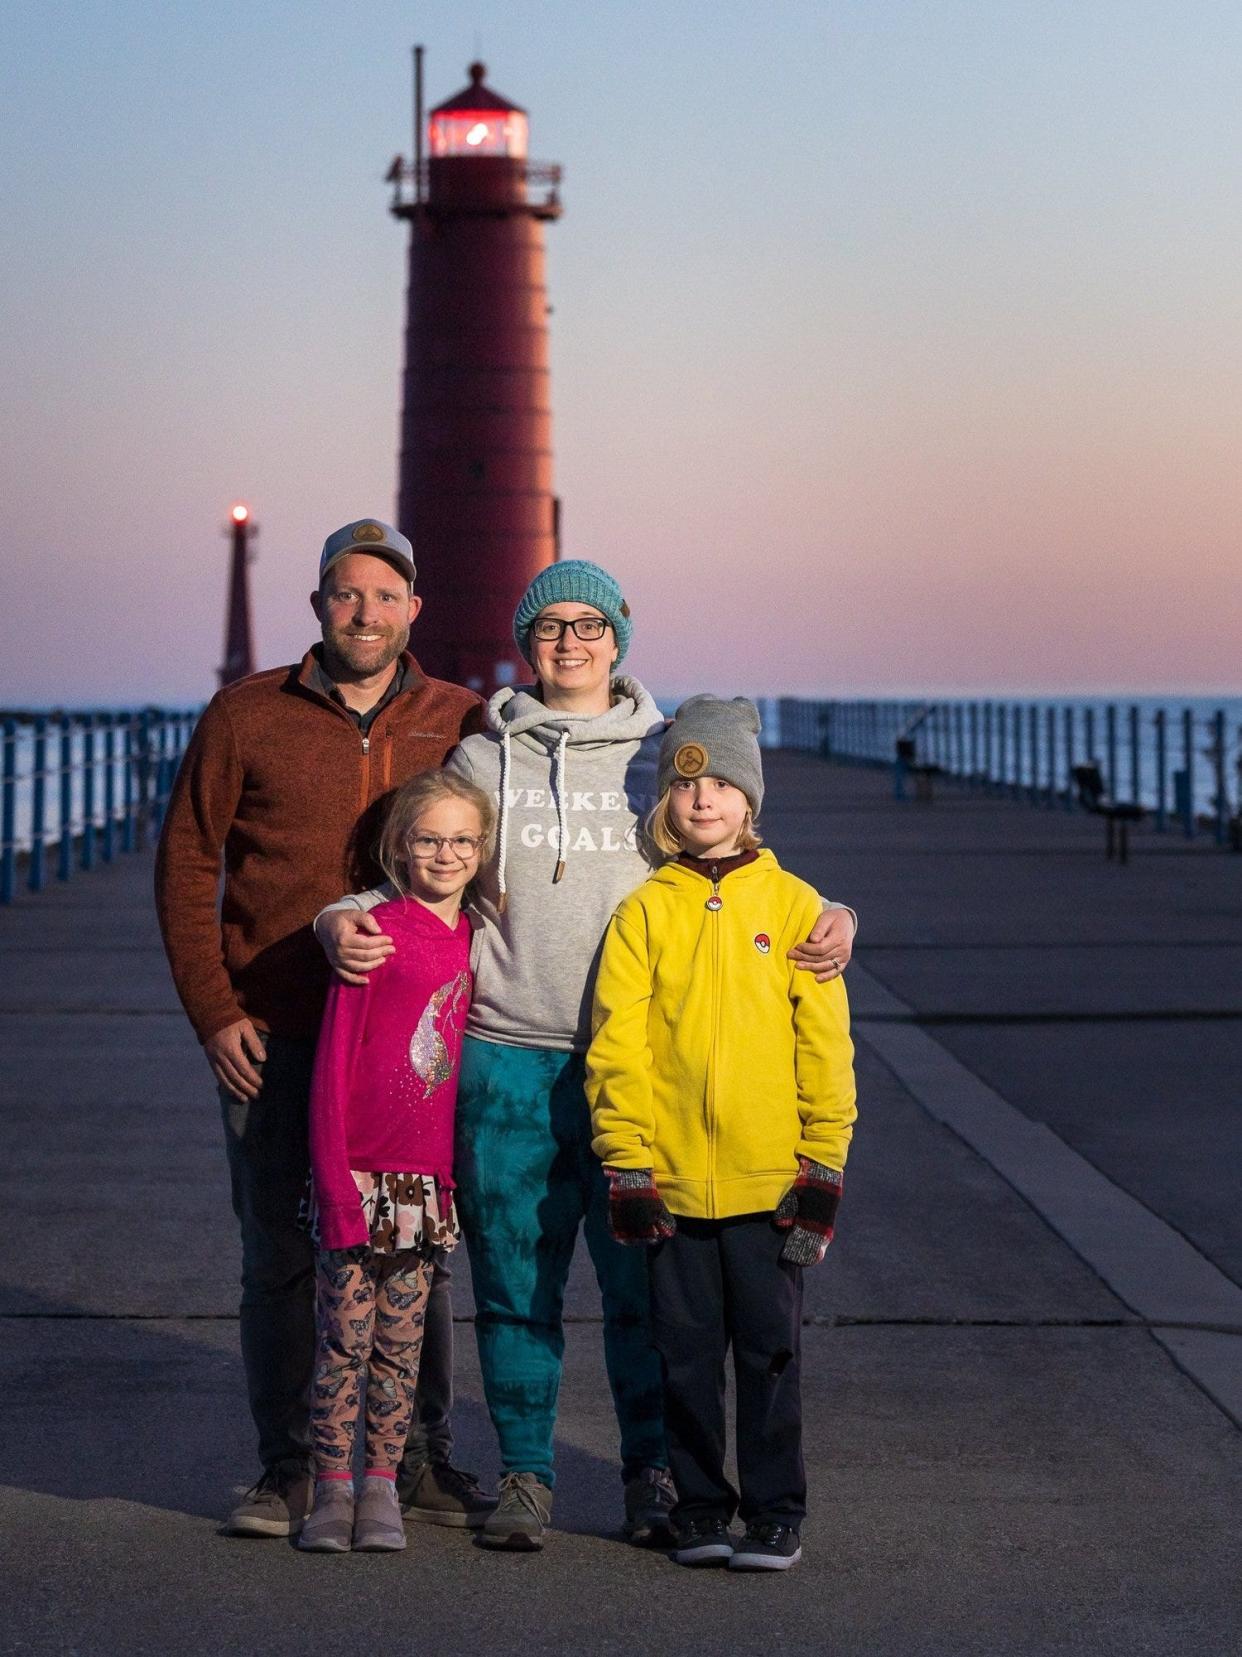 Chris and Alison Major and their children Ewan (10) and Gwynnie (8) will embark on America’s Great Loop. Their official start date is May 5.